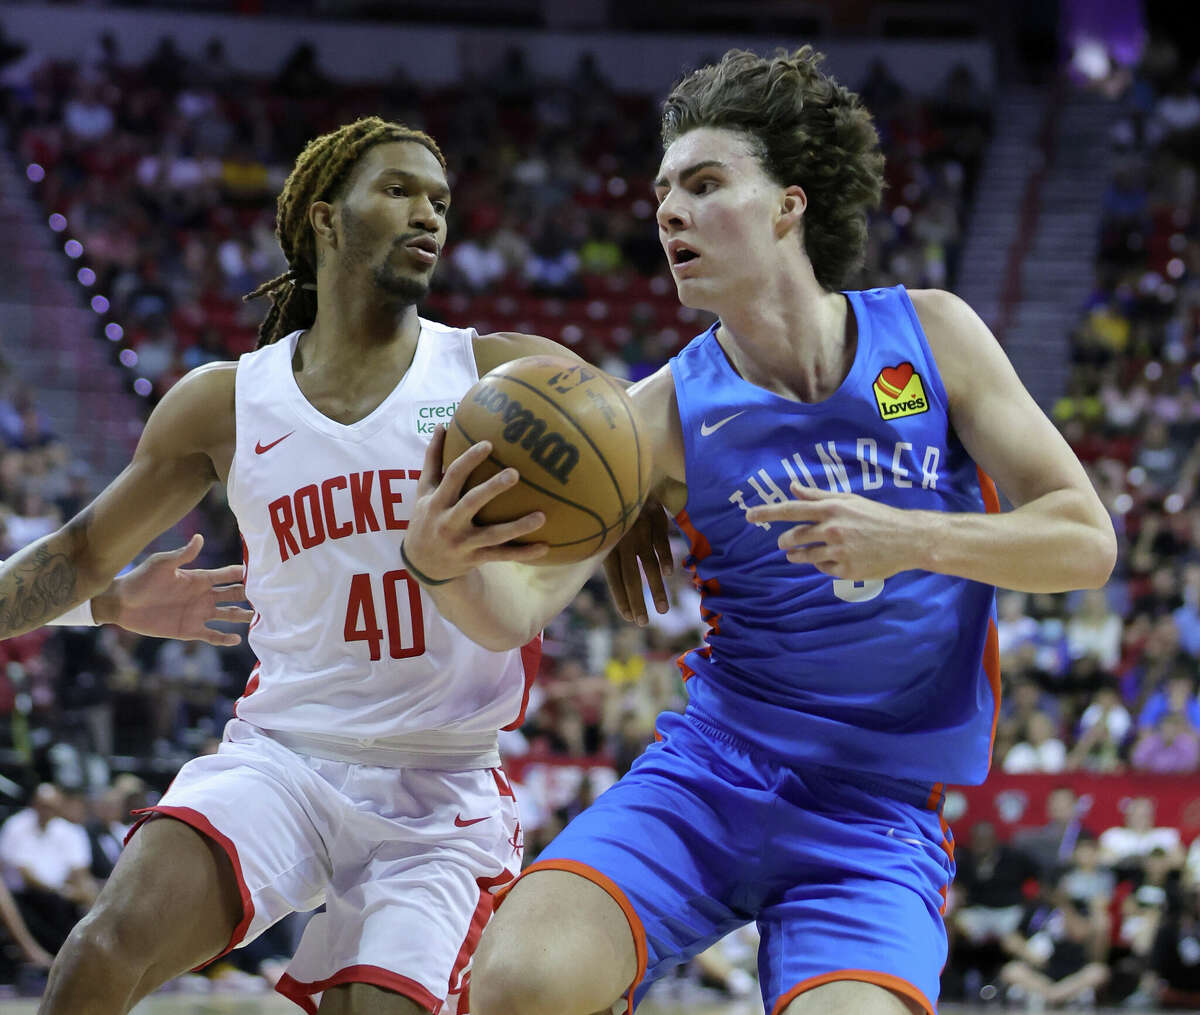 LAS VEGAS, NEVADA - JULY 09: Josh Giddey #3 of the Oklahoma City Thunder drives against Trhae Mitchell #40 of the Houston Rockets during the 2022 NBA Summer League at the Thomas & Mack Center on July 09, 2022 in Las Vegas, Nevada. NOTE TO USER: User expressly acknowledges and agrees that, by downloading and or using this photograph, User is consenting to the terms and conditions of the Getty Images License Agreement. (Photo by Ethan Miller/Getty Images)